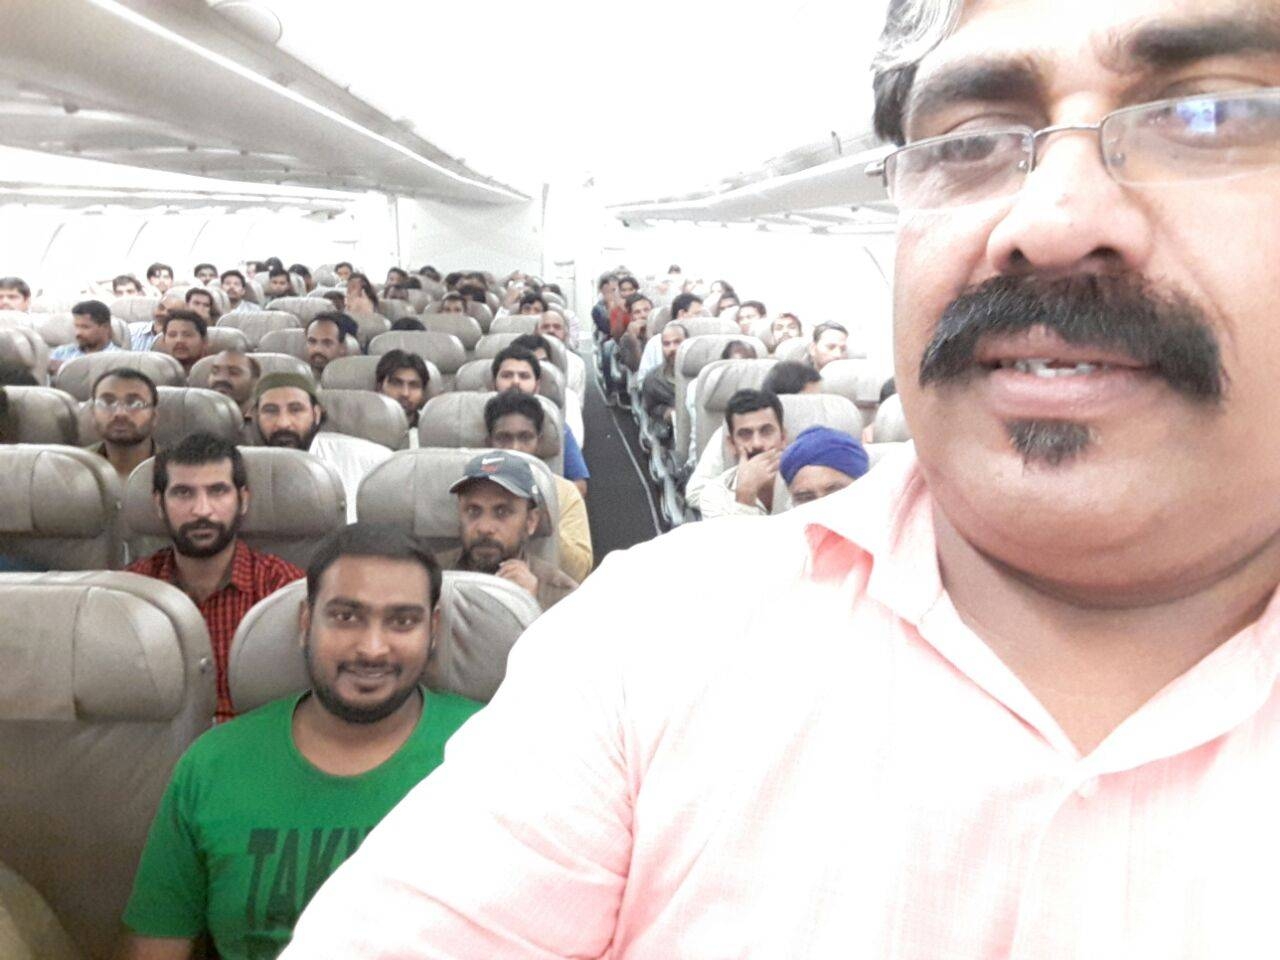 Shoukat Nass travels with a group of 150 deportees to Kochi, India.